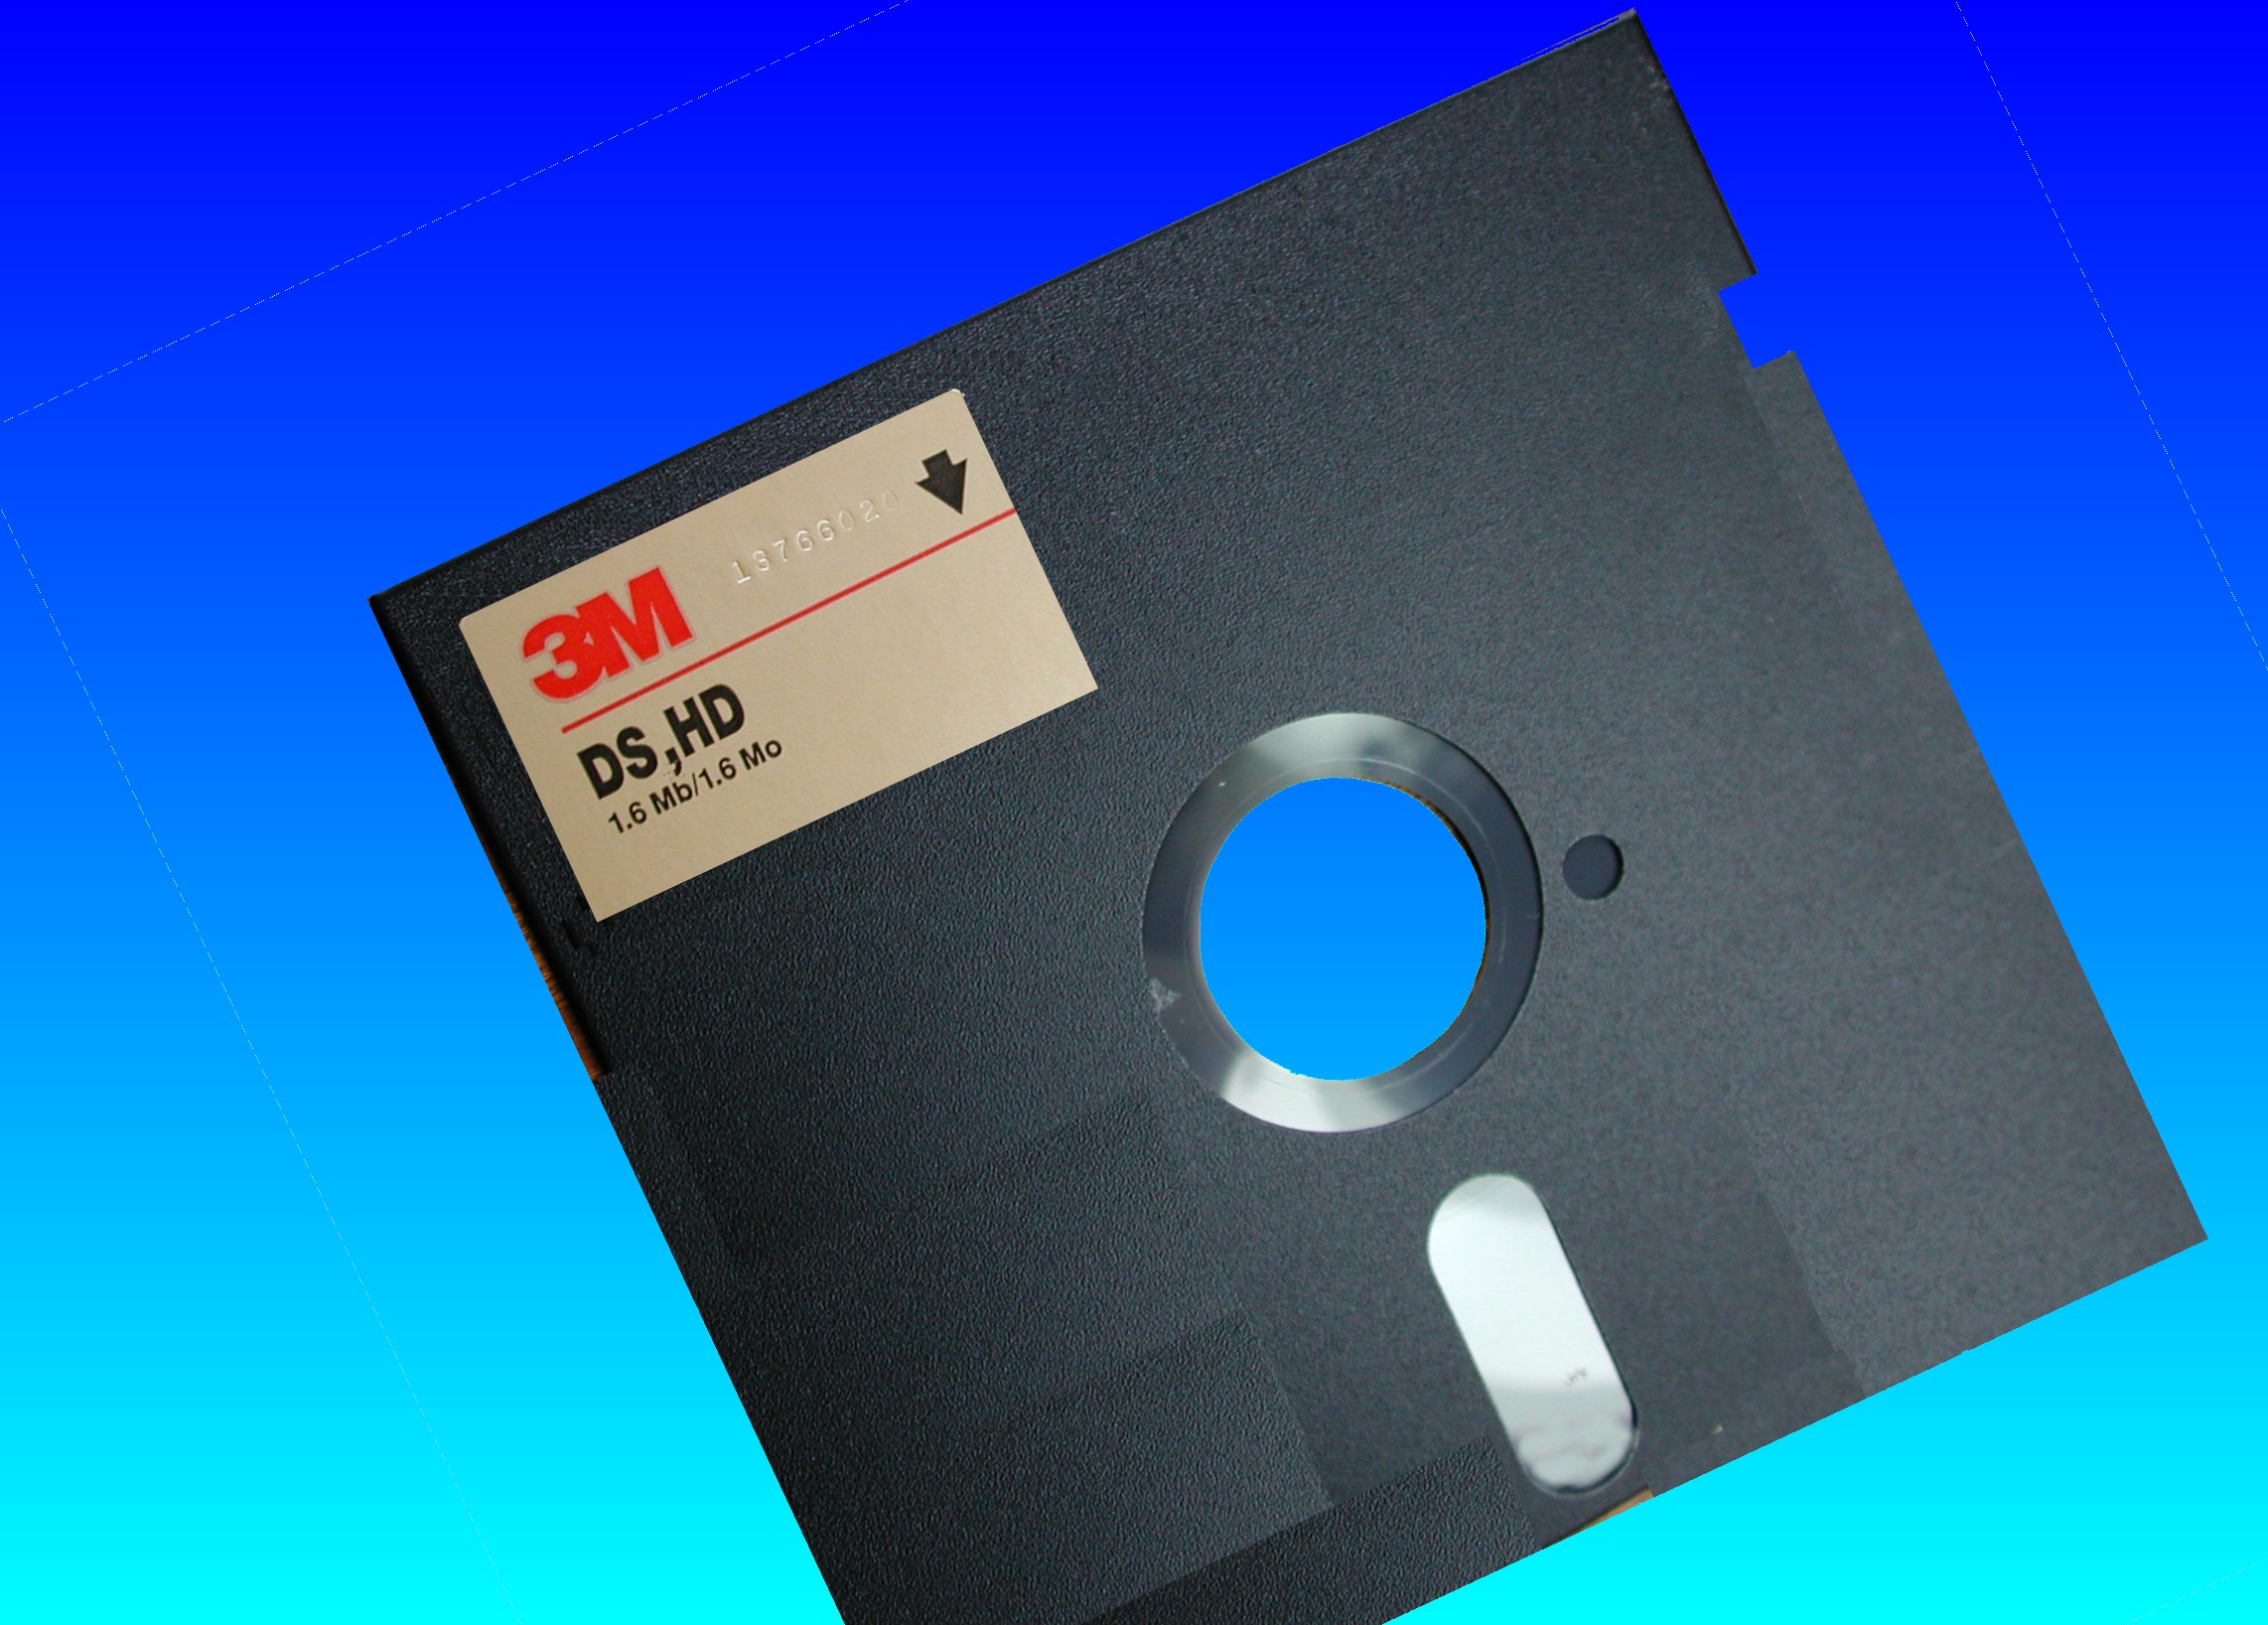 no options for formatting 5.25 floppy disk